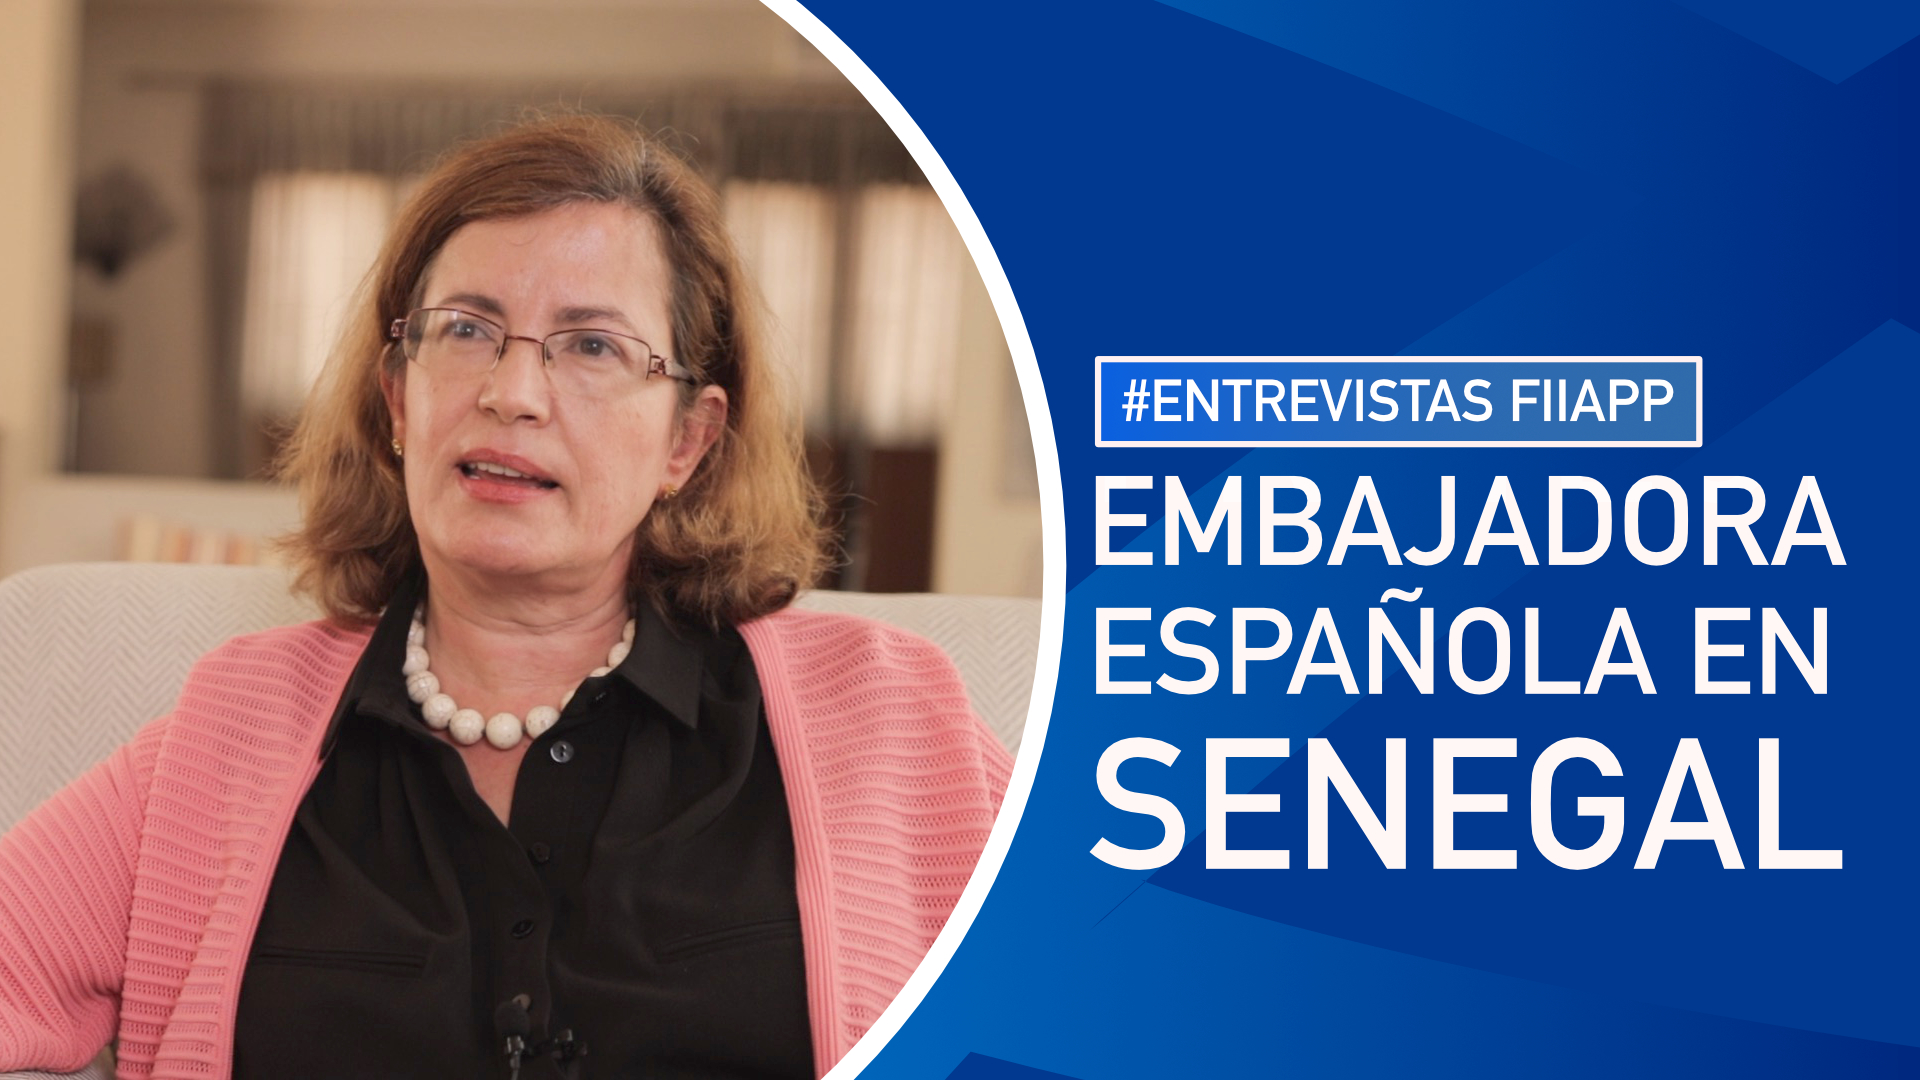 We interview Spain's Ambassador in Senegal. Olga Cabarga speaks about the importance of cooperation.